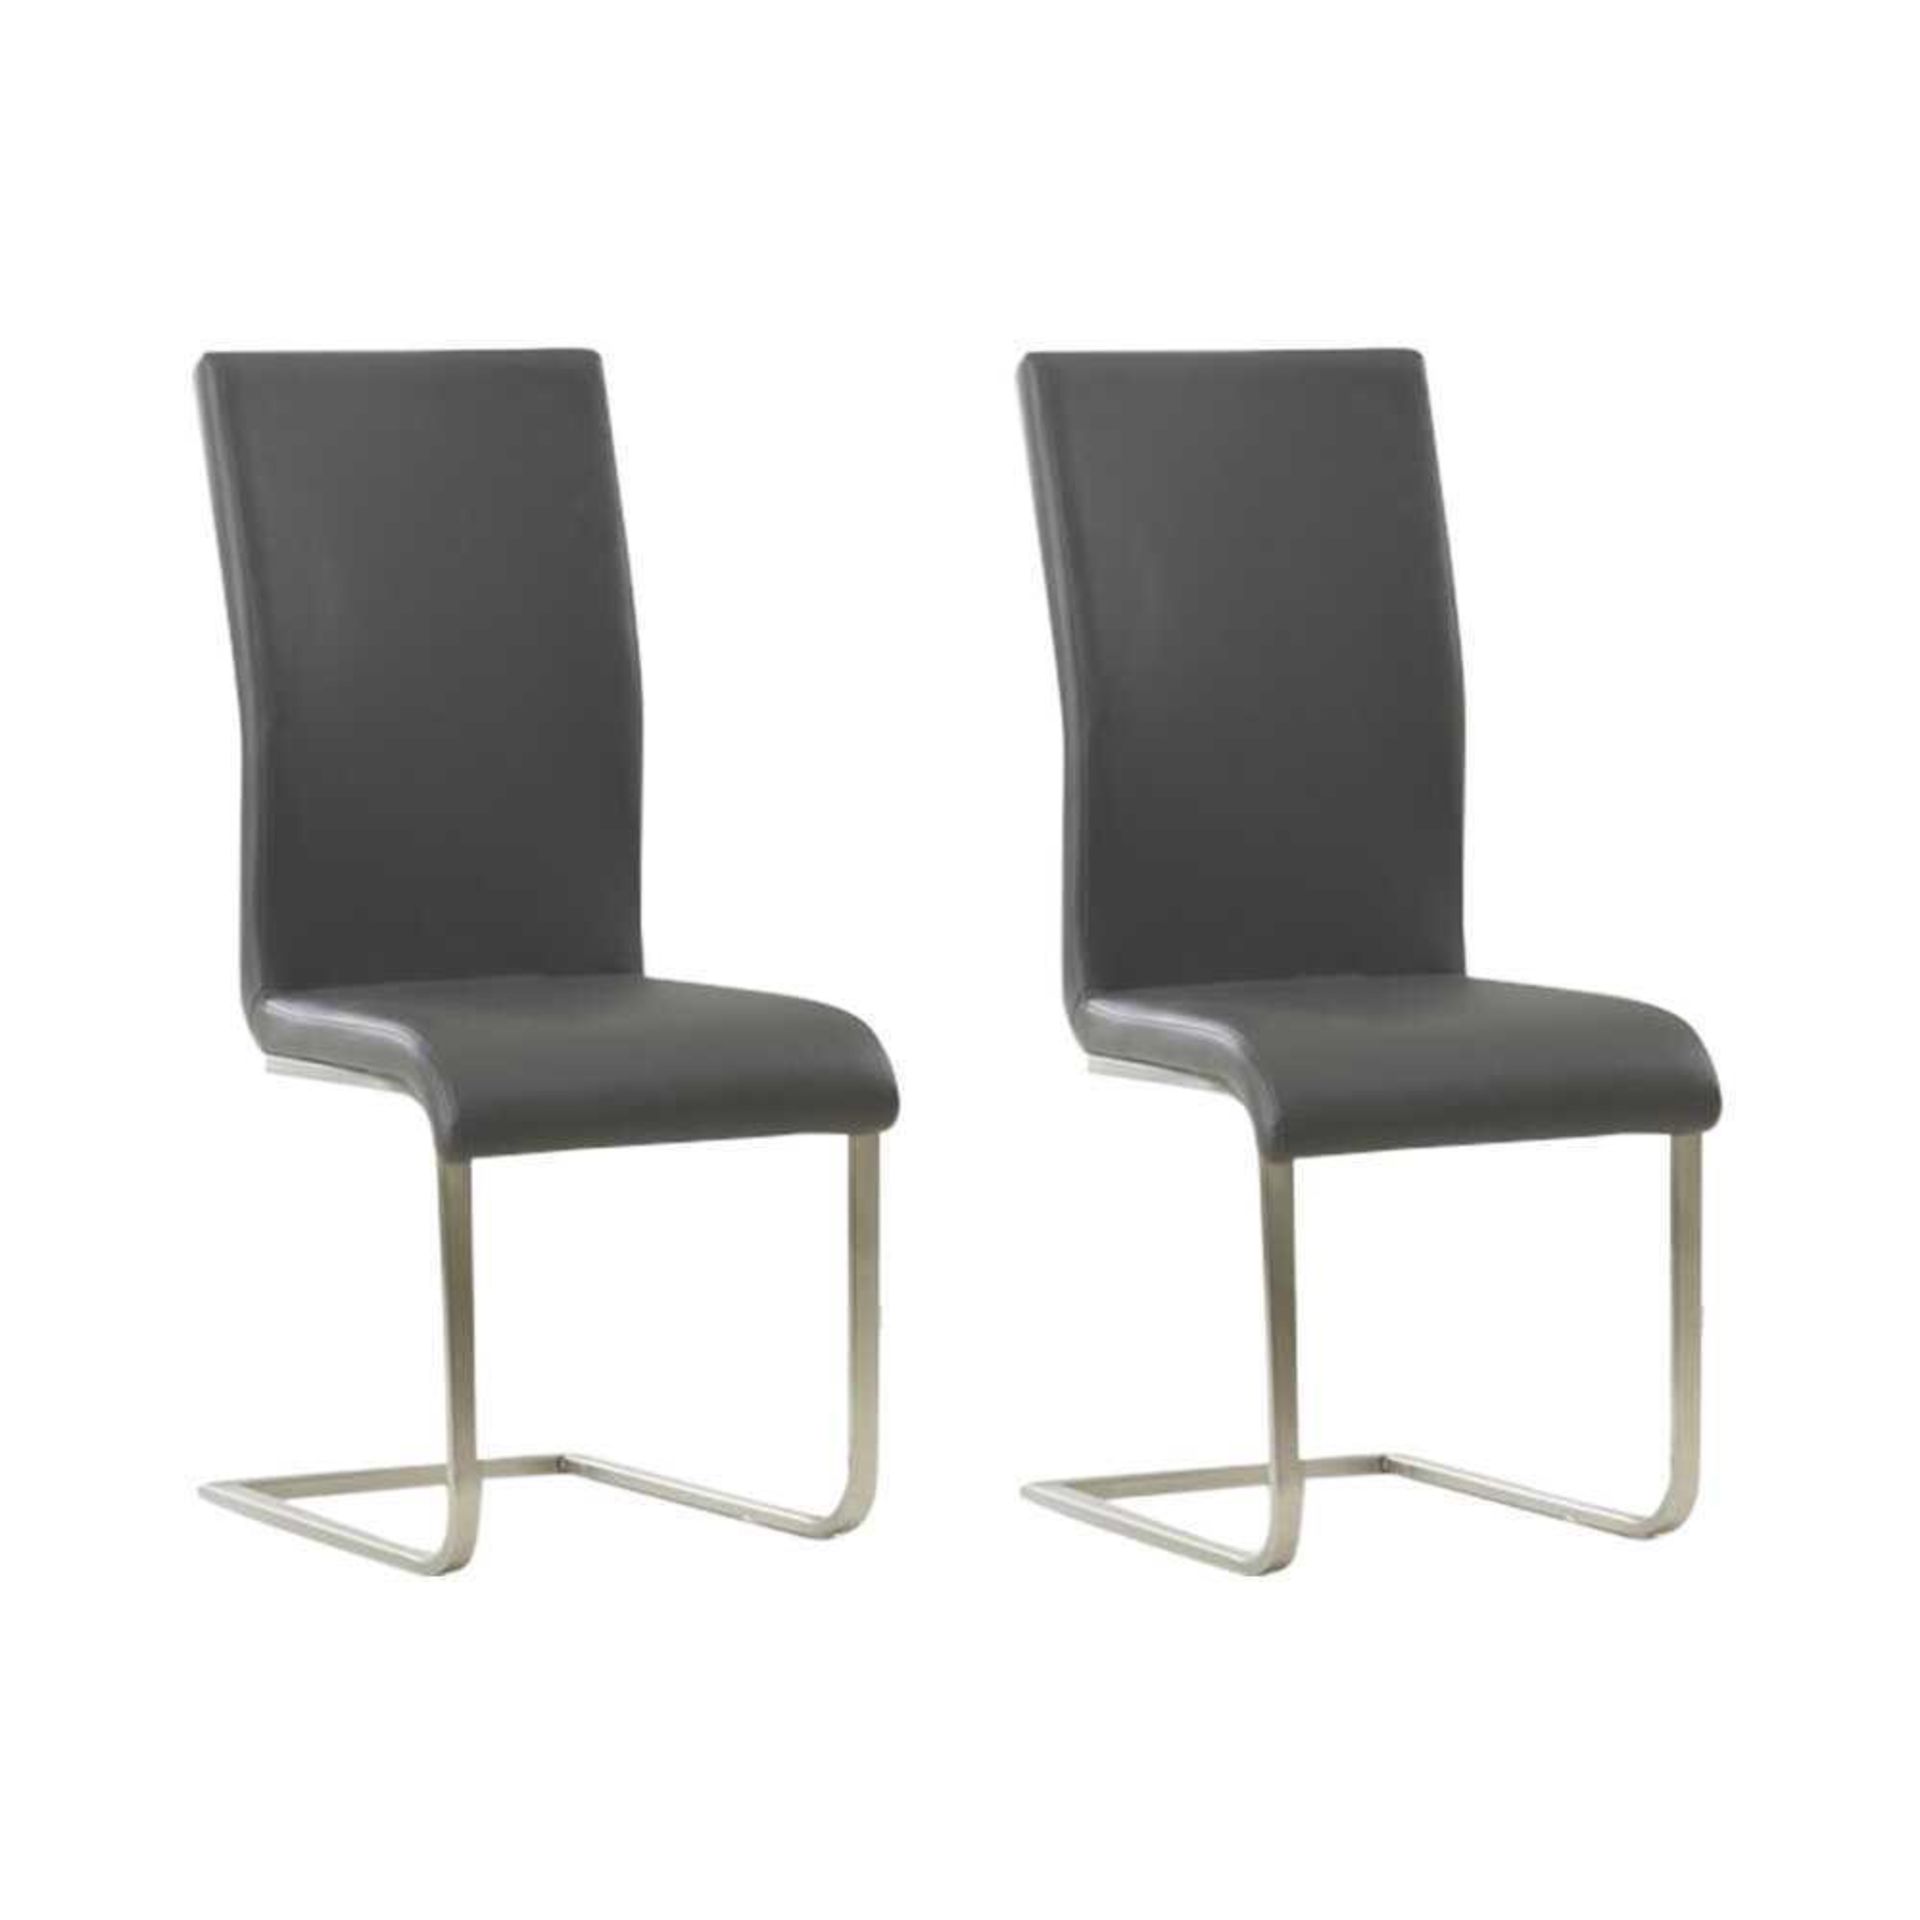 Ad) RRP £300 Lot To Contain X1 Boxed Wayfair Item (Set Of 2 Crovetti Upholstered Dining Chairs Blac